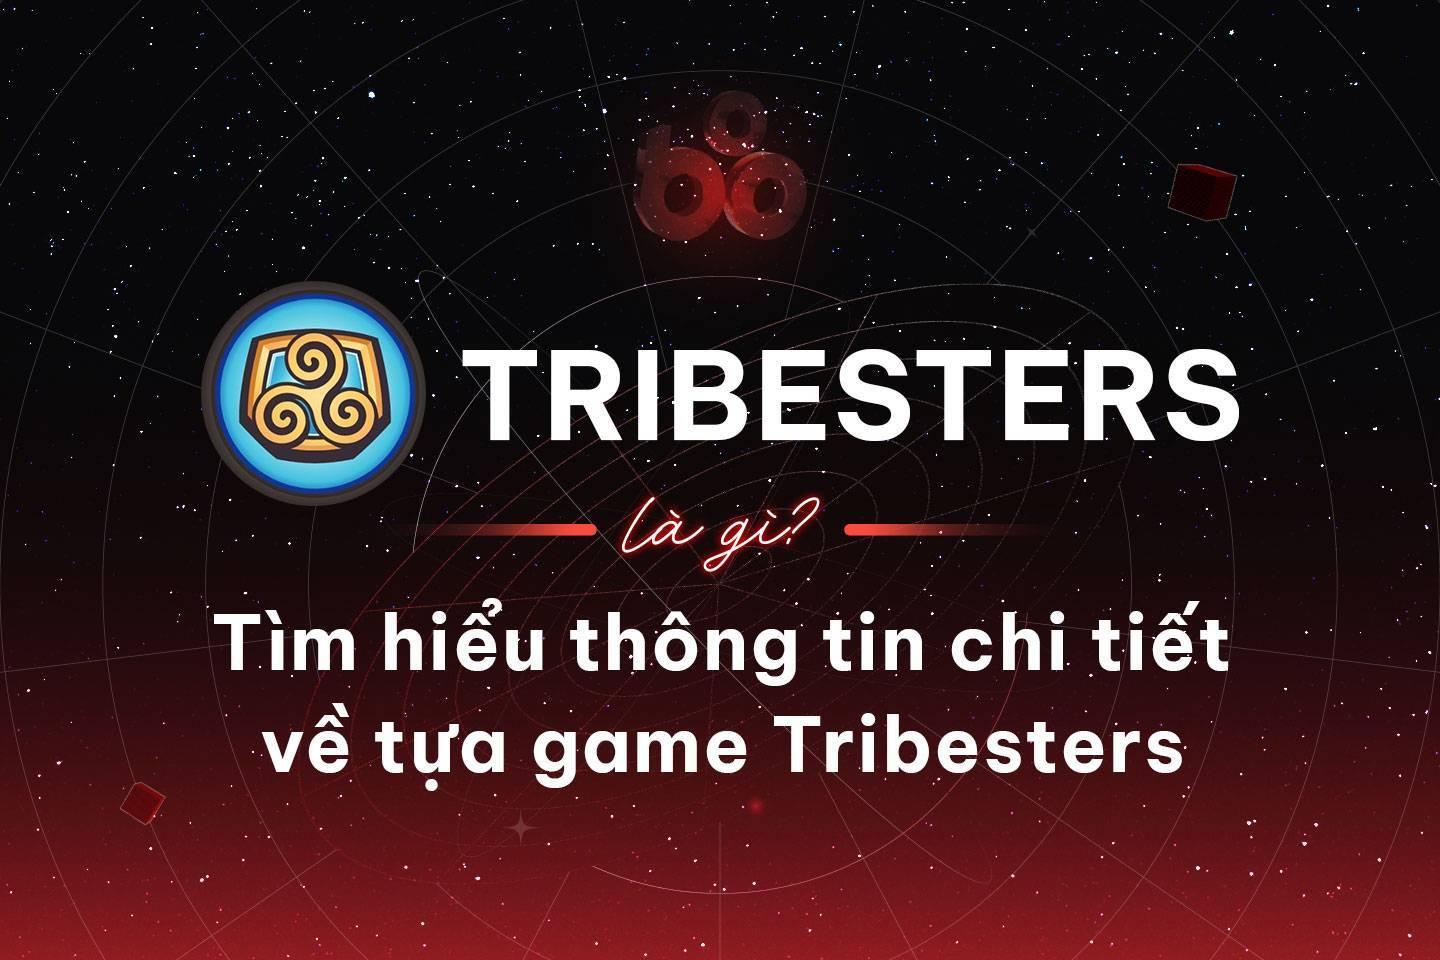 tribesters-la-gi-tim-hieu-thong-tin-chi-tiet-ve-tua-game-tribesters